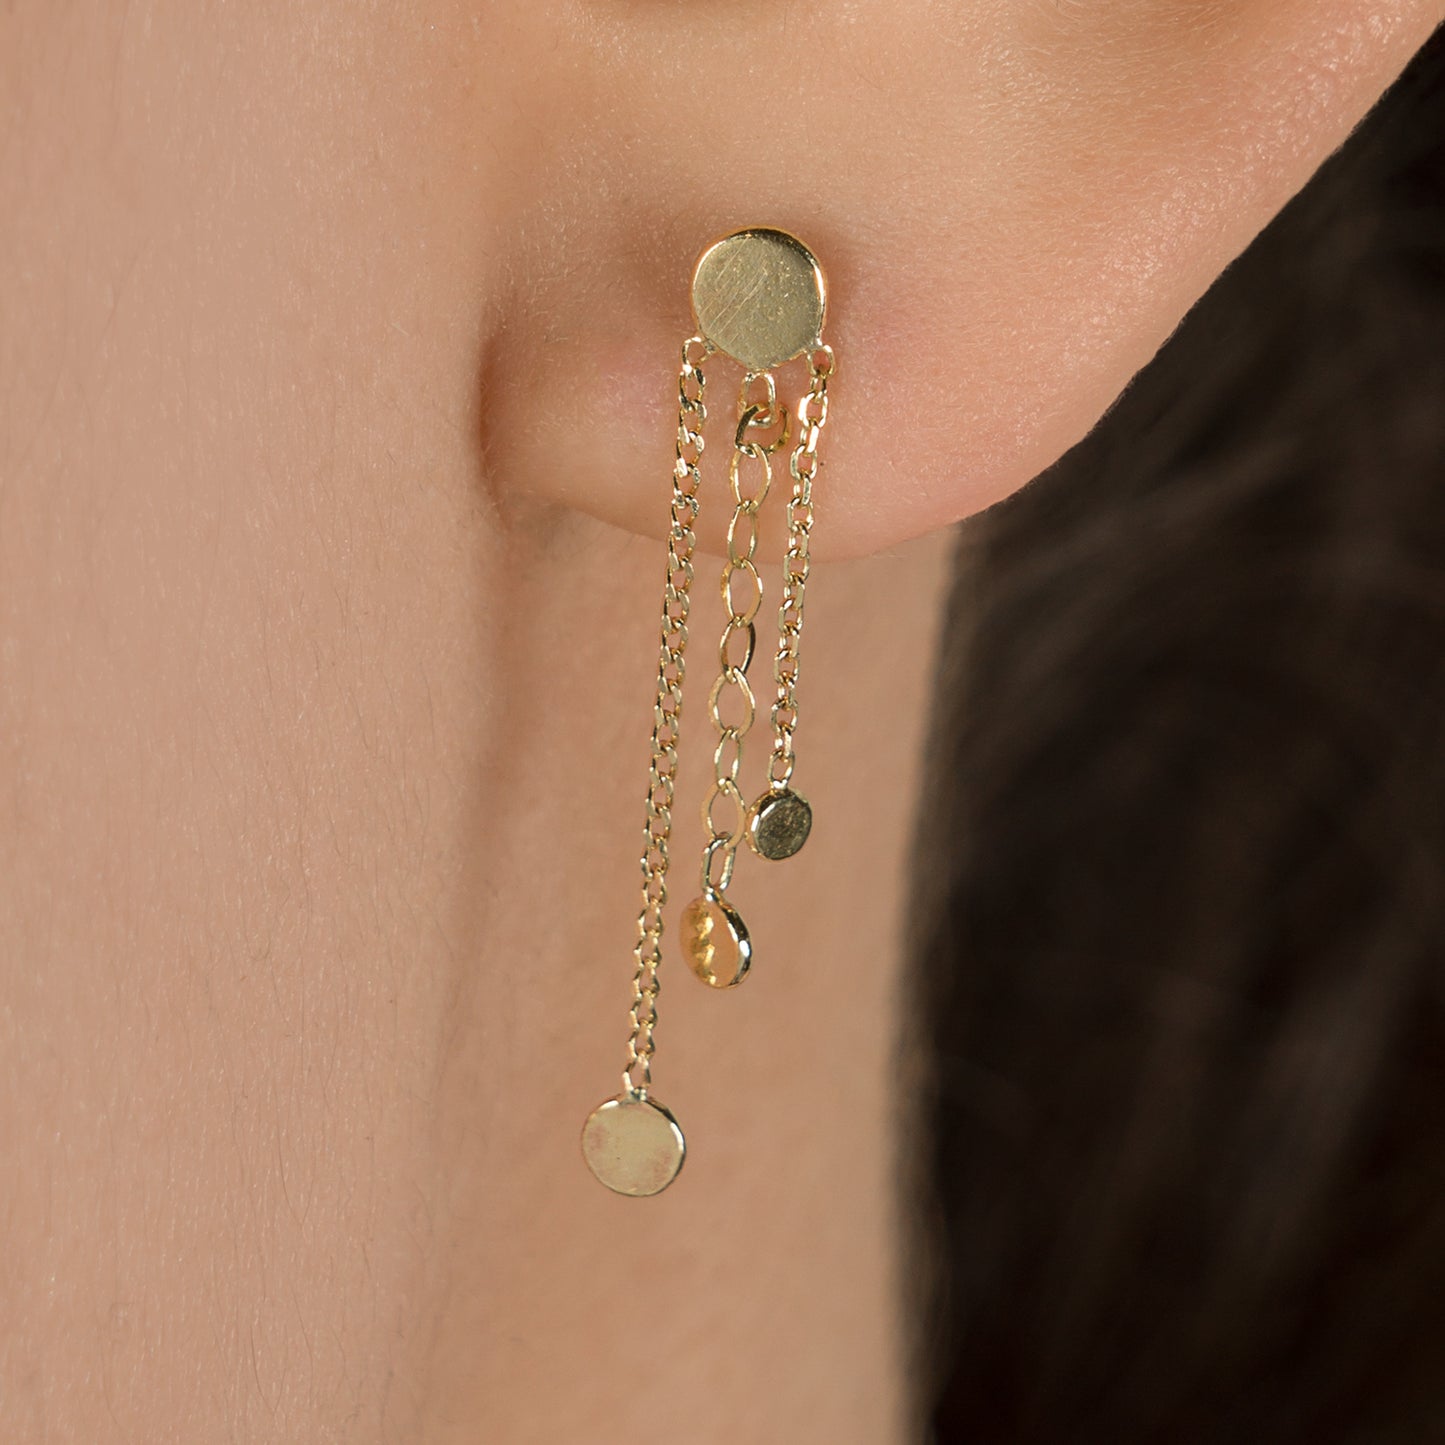 Sweet Pea 18ct gold Ancient Worlds stud earring with chain and disc tassels on model